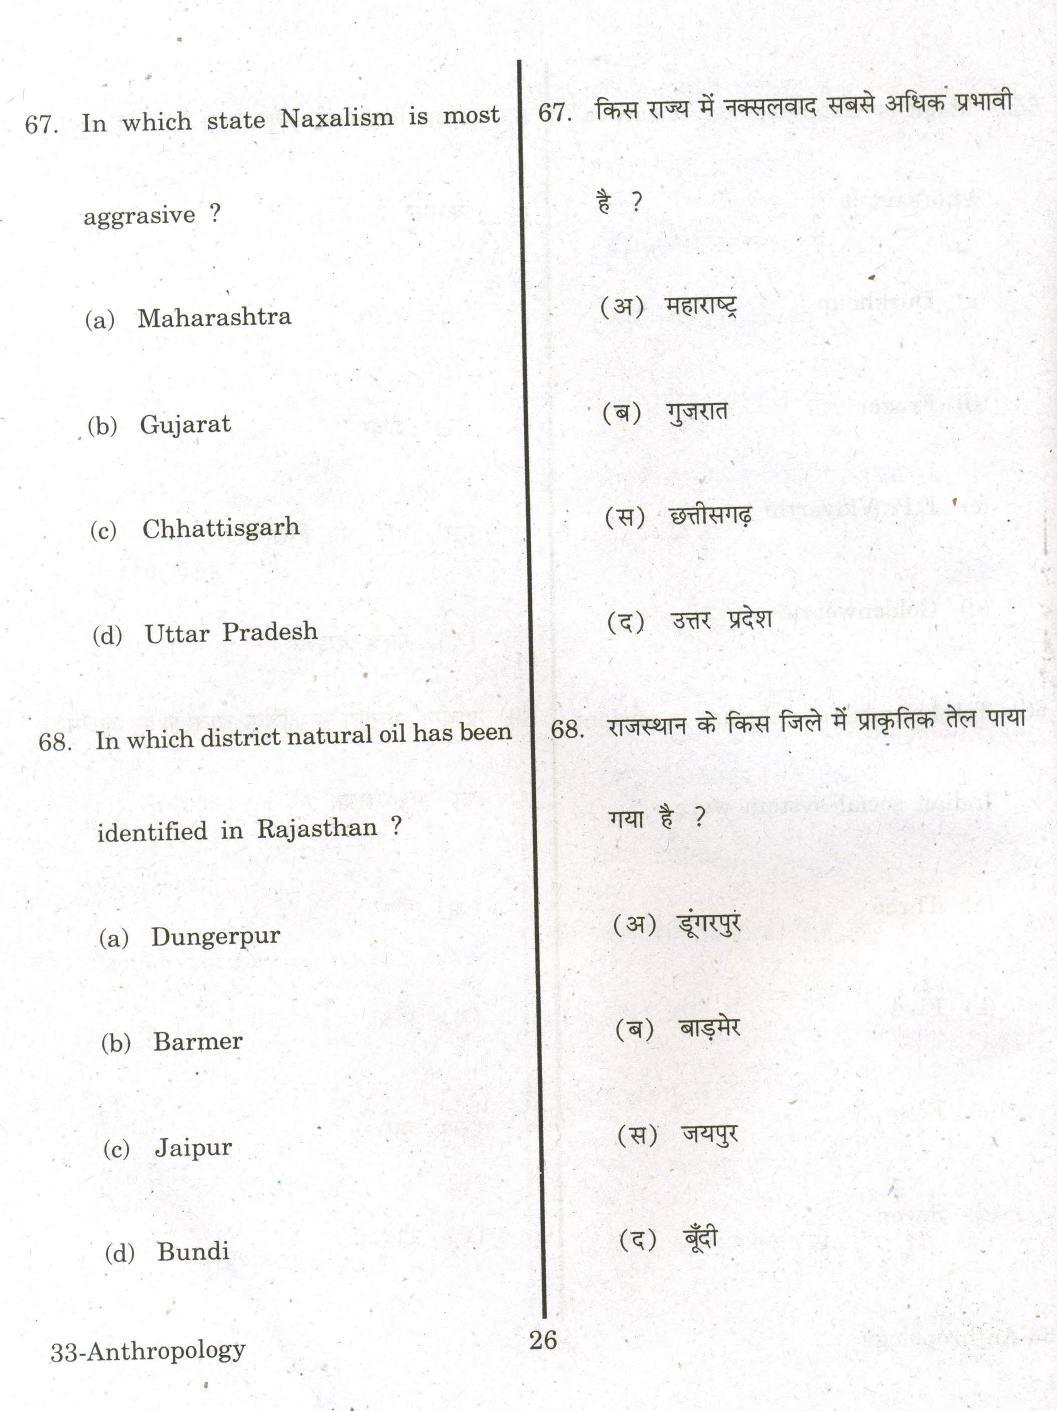 URATPG Anthropology 2013 Question Paper - Page 25